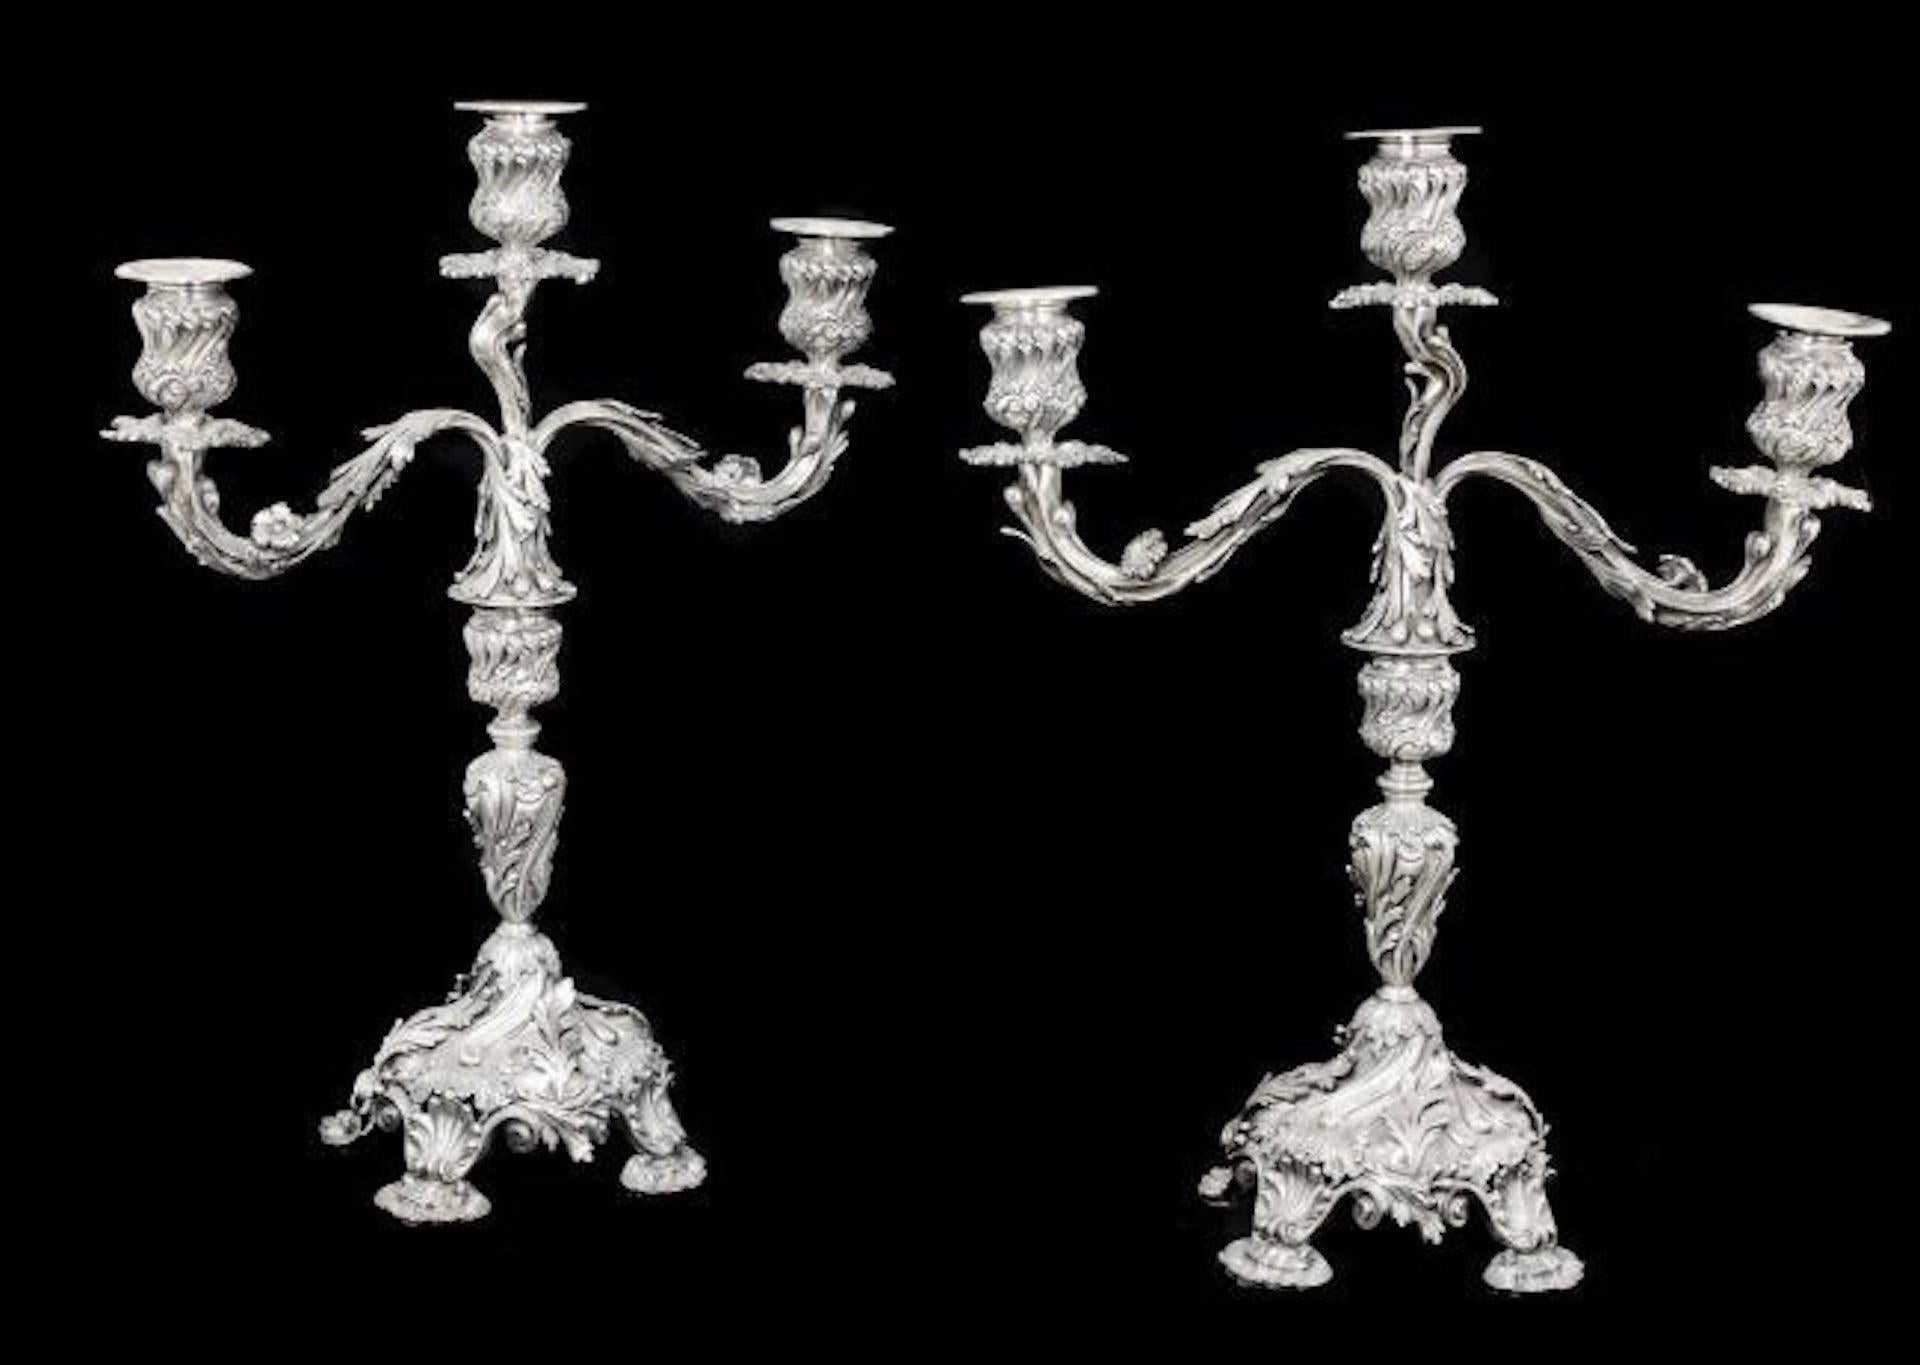 Pair of Portuguese silver three-light candelabra,
Lisbon, early 20th century,
in 18th century style, each on four shell and scroll feet, the domed base with cast scrolling foliage, rising to a baluster stem with foliage, the branches with